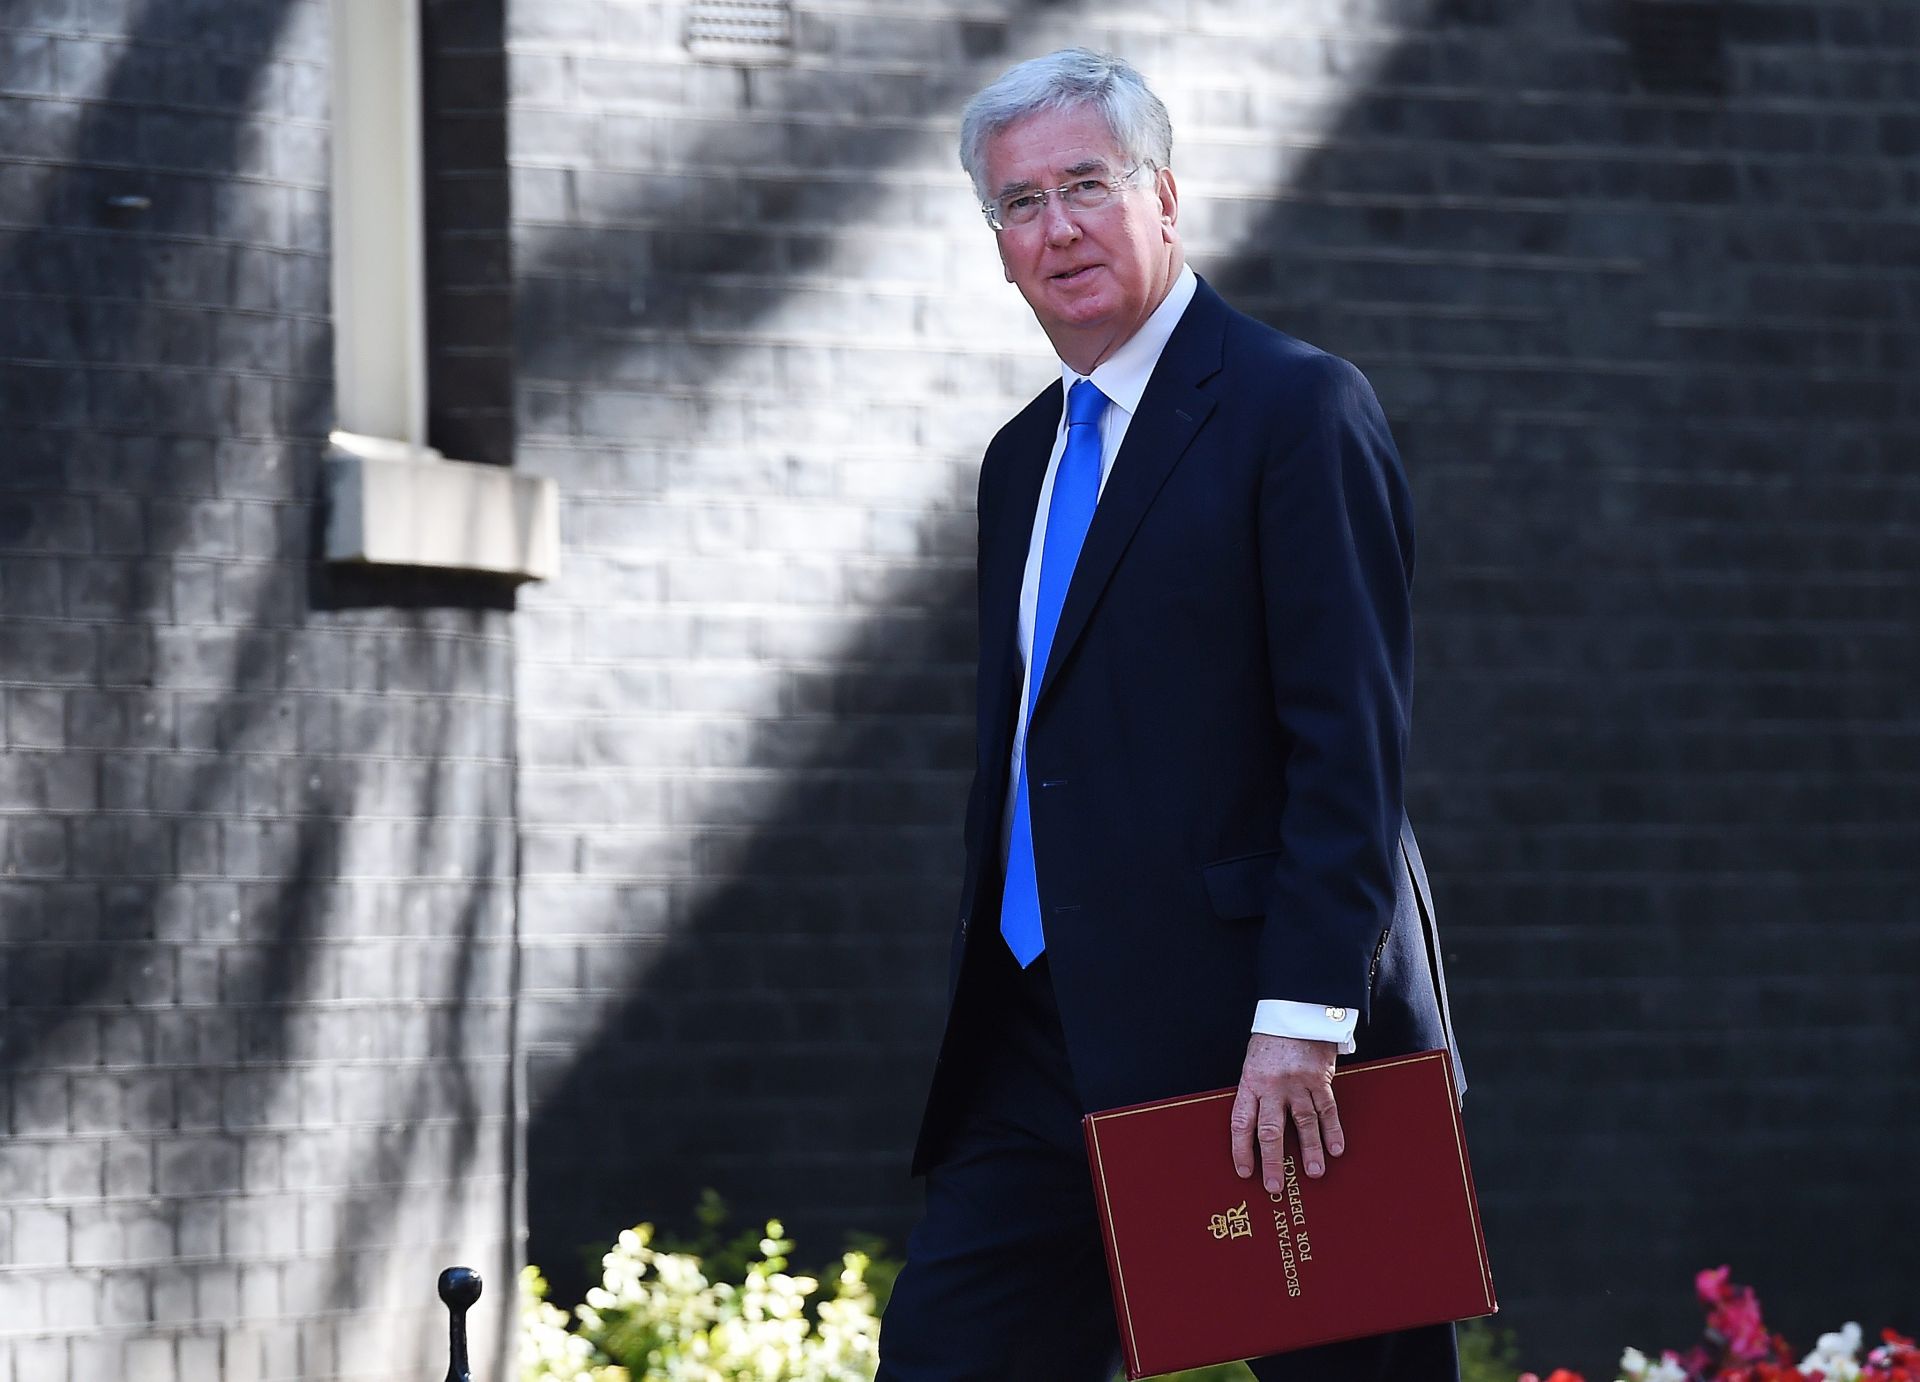 epa05431595 British Secretary of State for Defence Michael Fallon arrives for a cabinet meeting at number 10 Downing Street in London, 19 July 2016. British Prime Minister Theresa May held her first cabinet meeting 19 July 2016.  EPA/ANDY RAIN